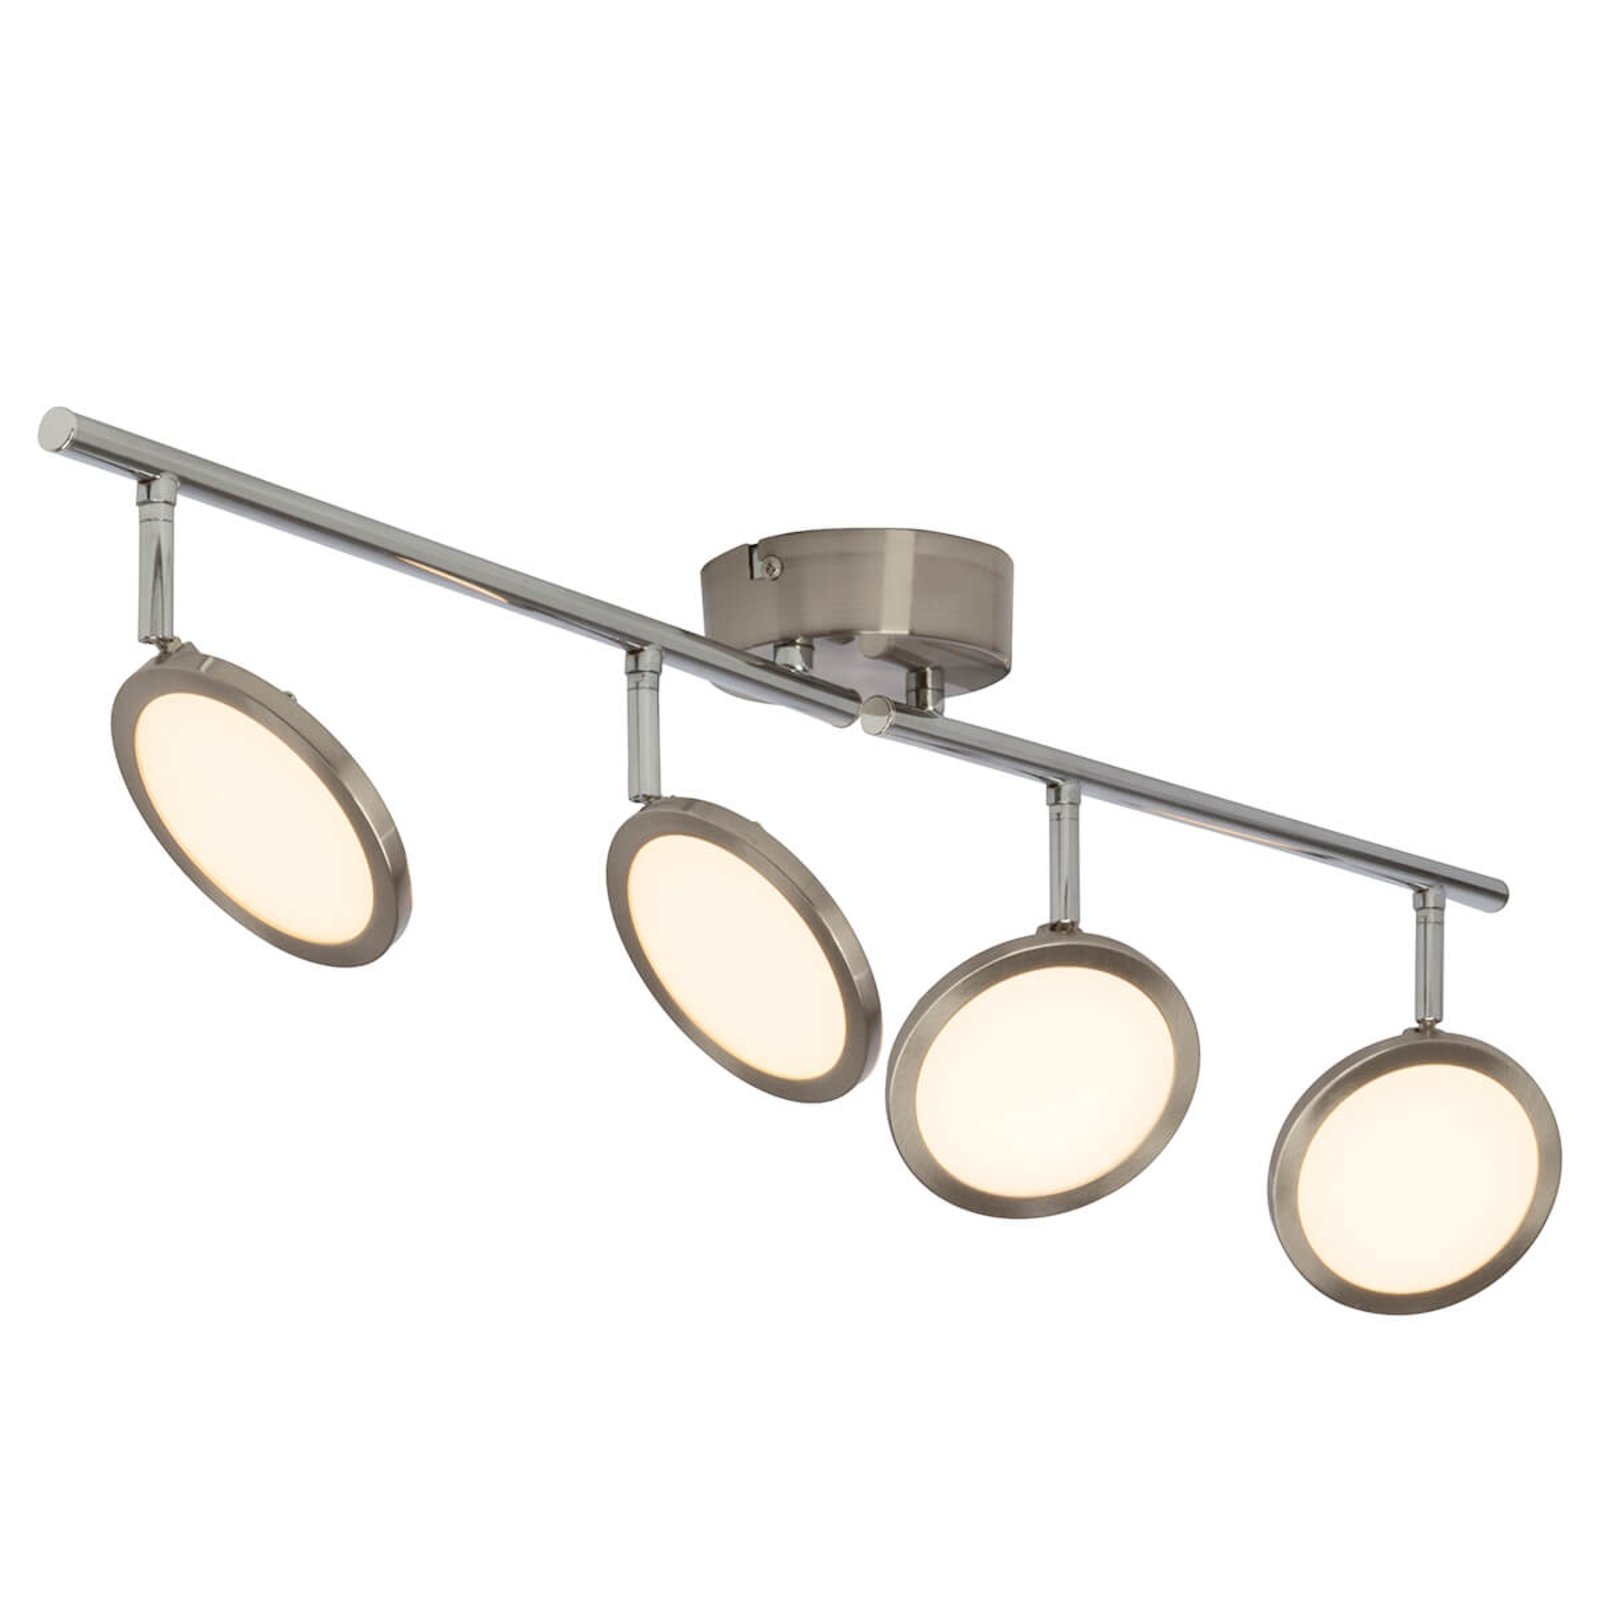 Dimmable LED ceiling light Scope, four-bulb